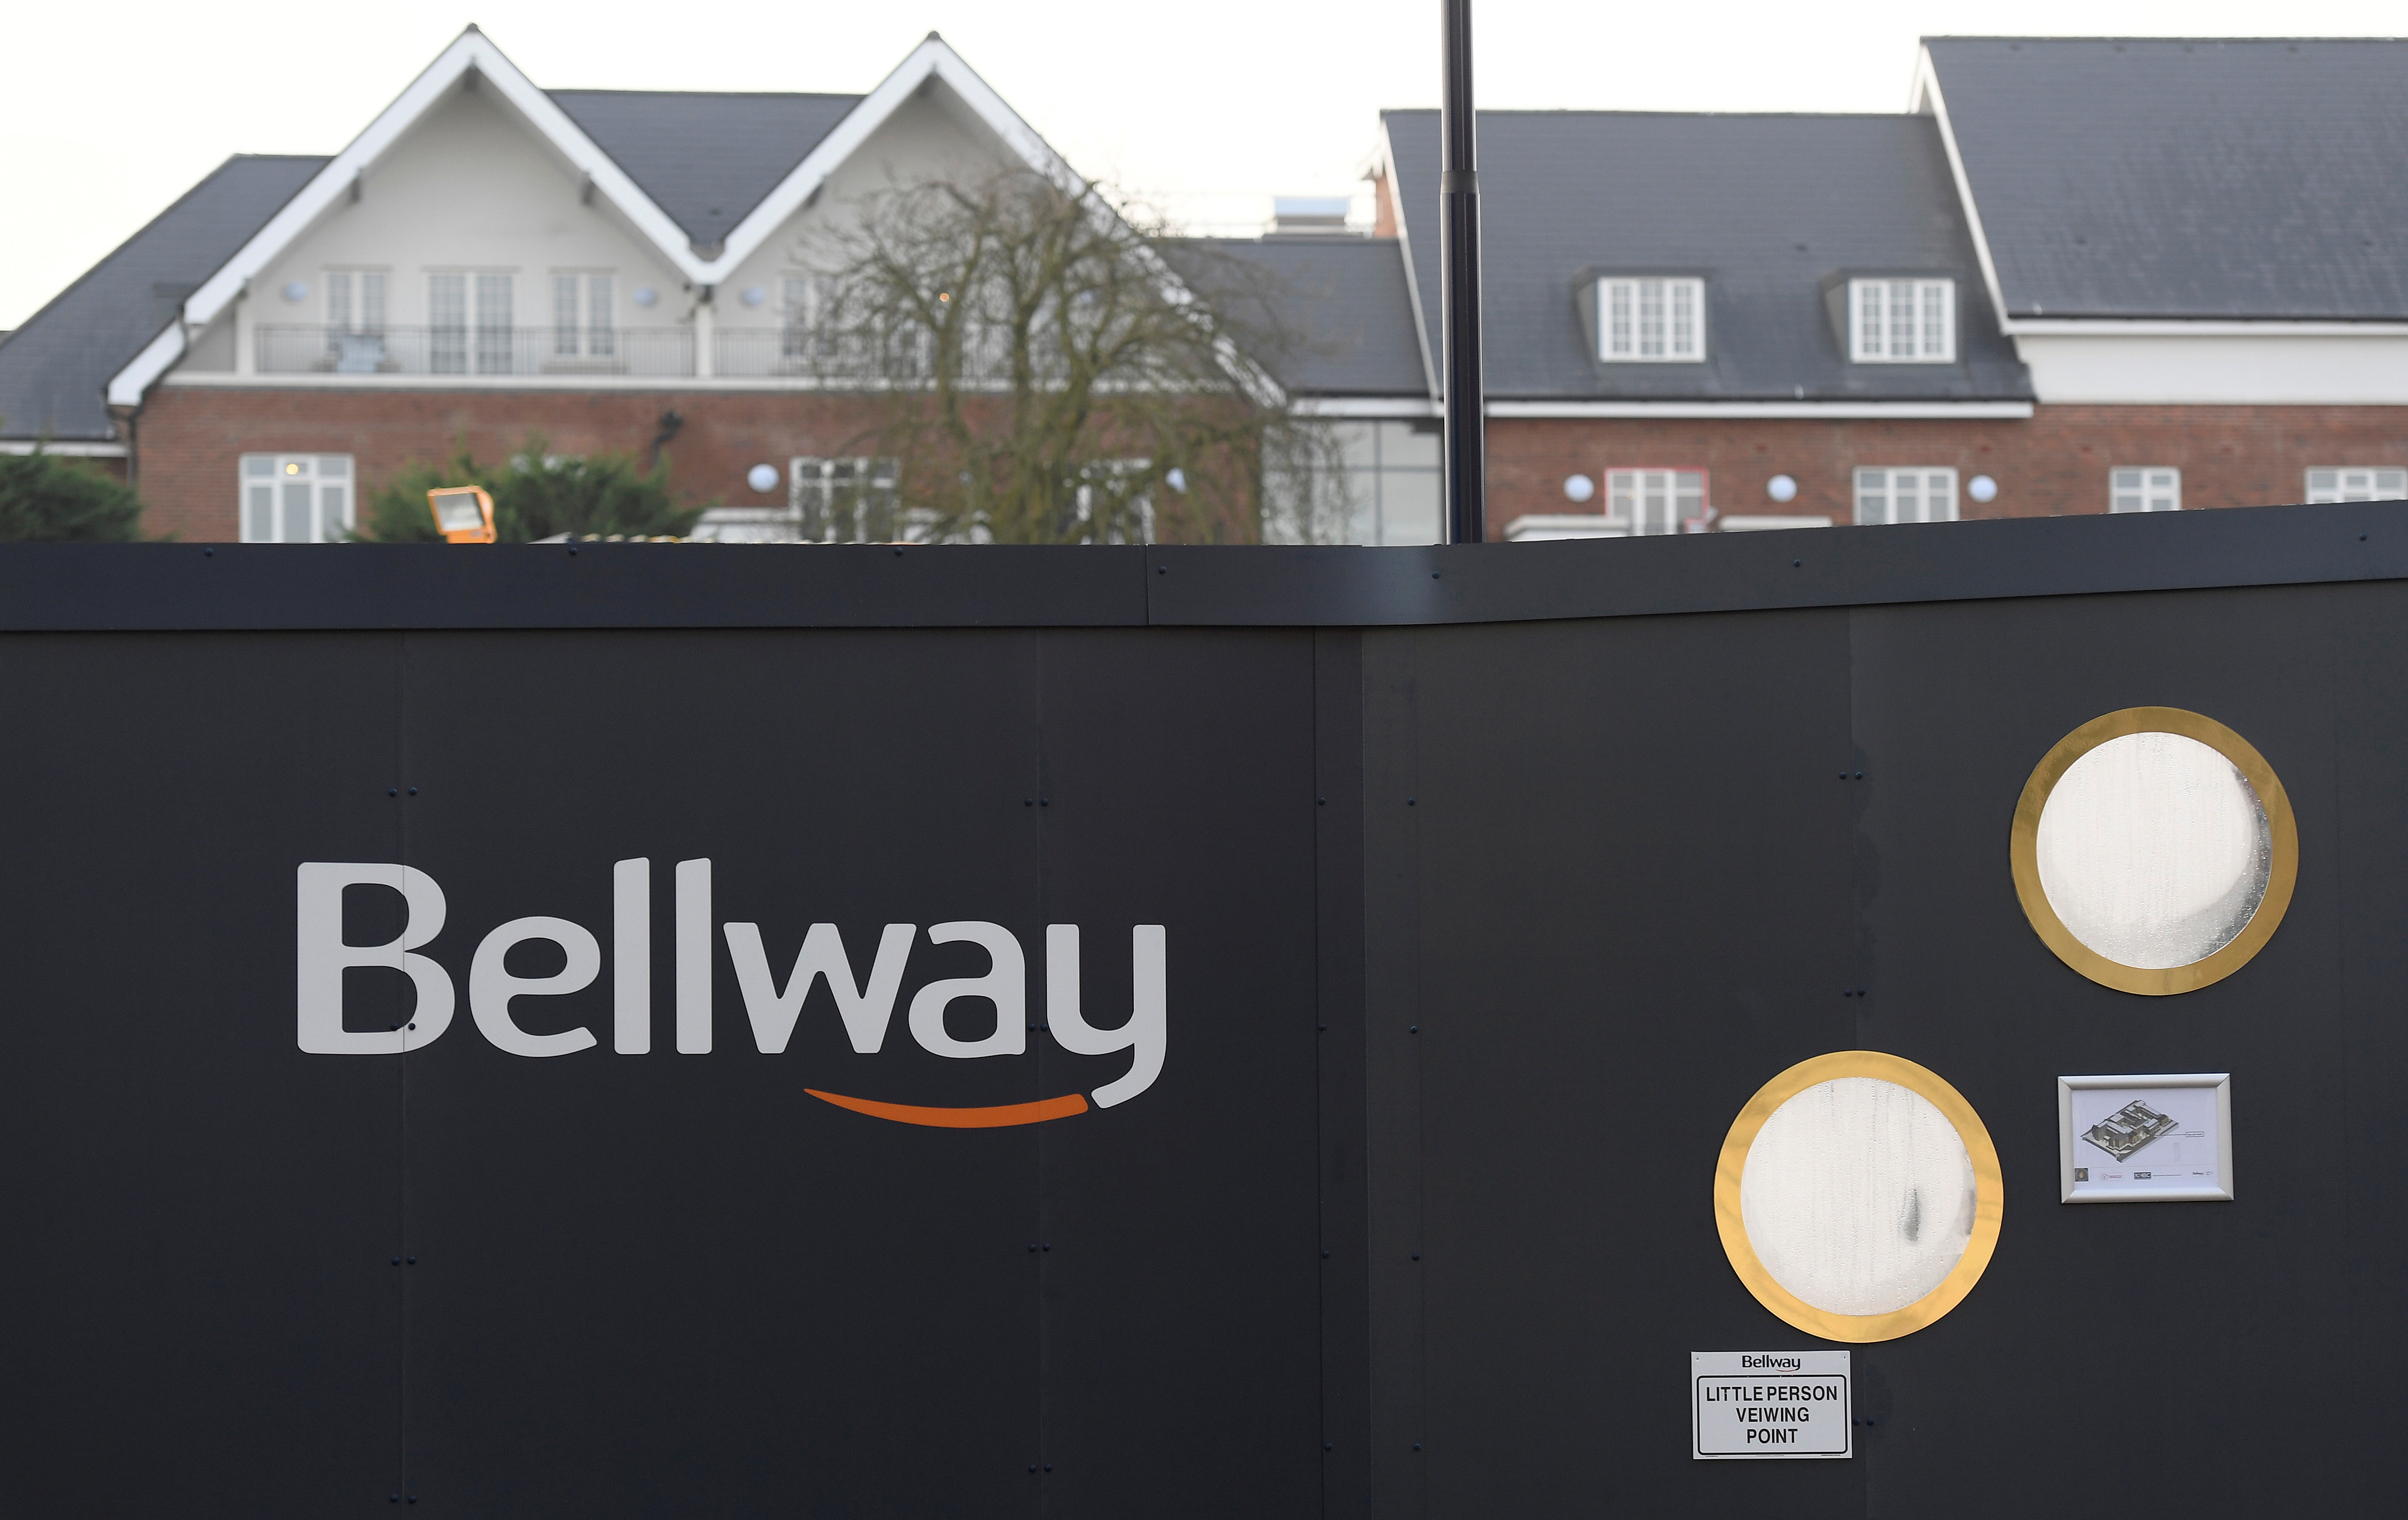 A Bellway sign is seen at a housing construction site in London